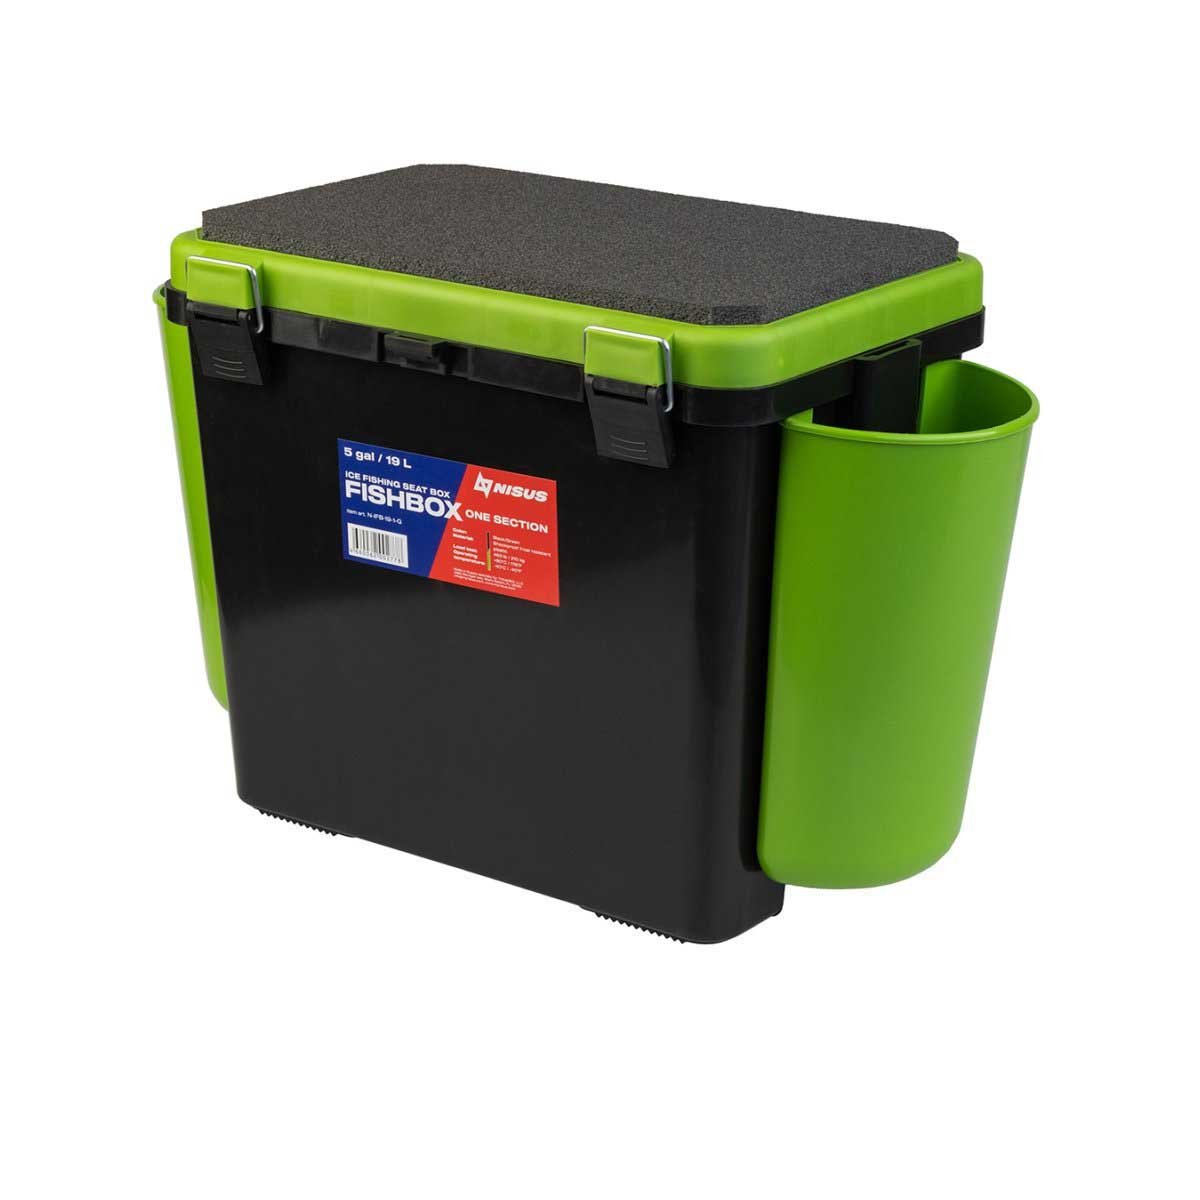 FishBox Large 5 gal SeatBox for Ice Fishing Tackle and Gear, green